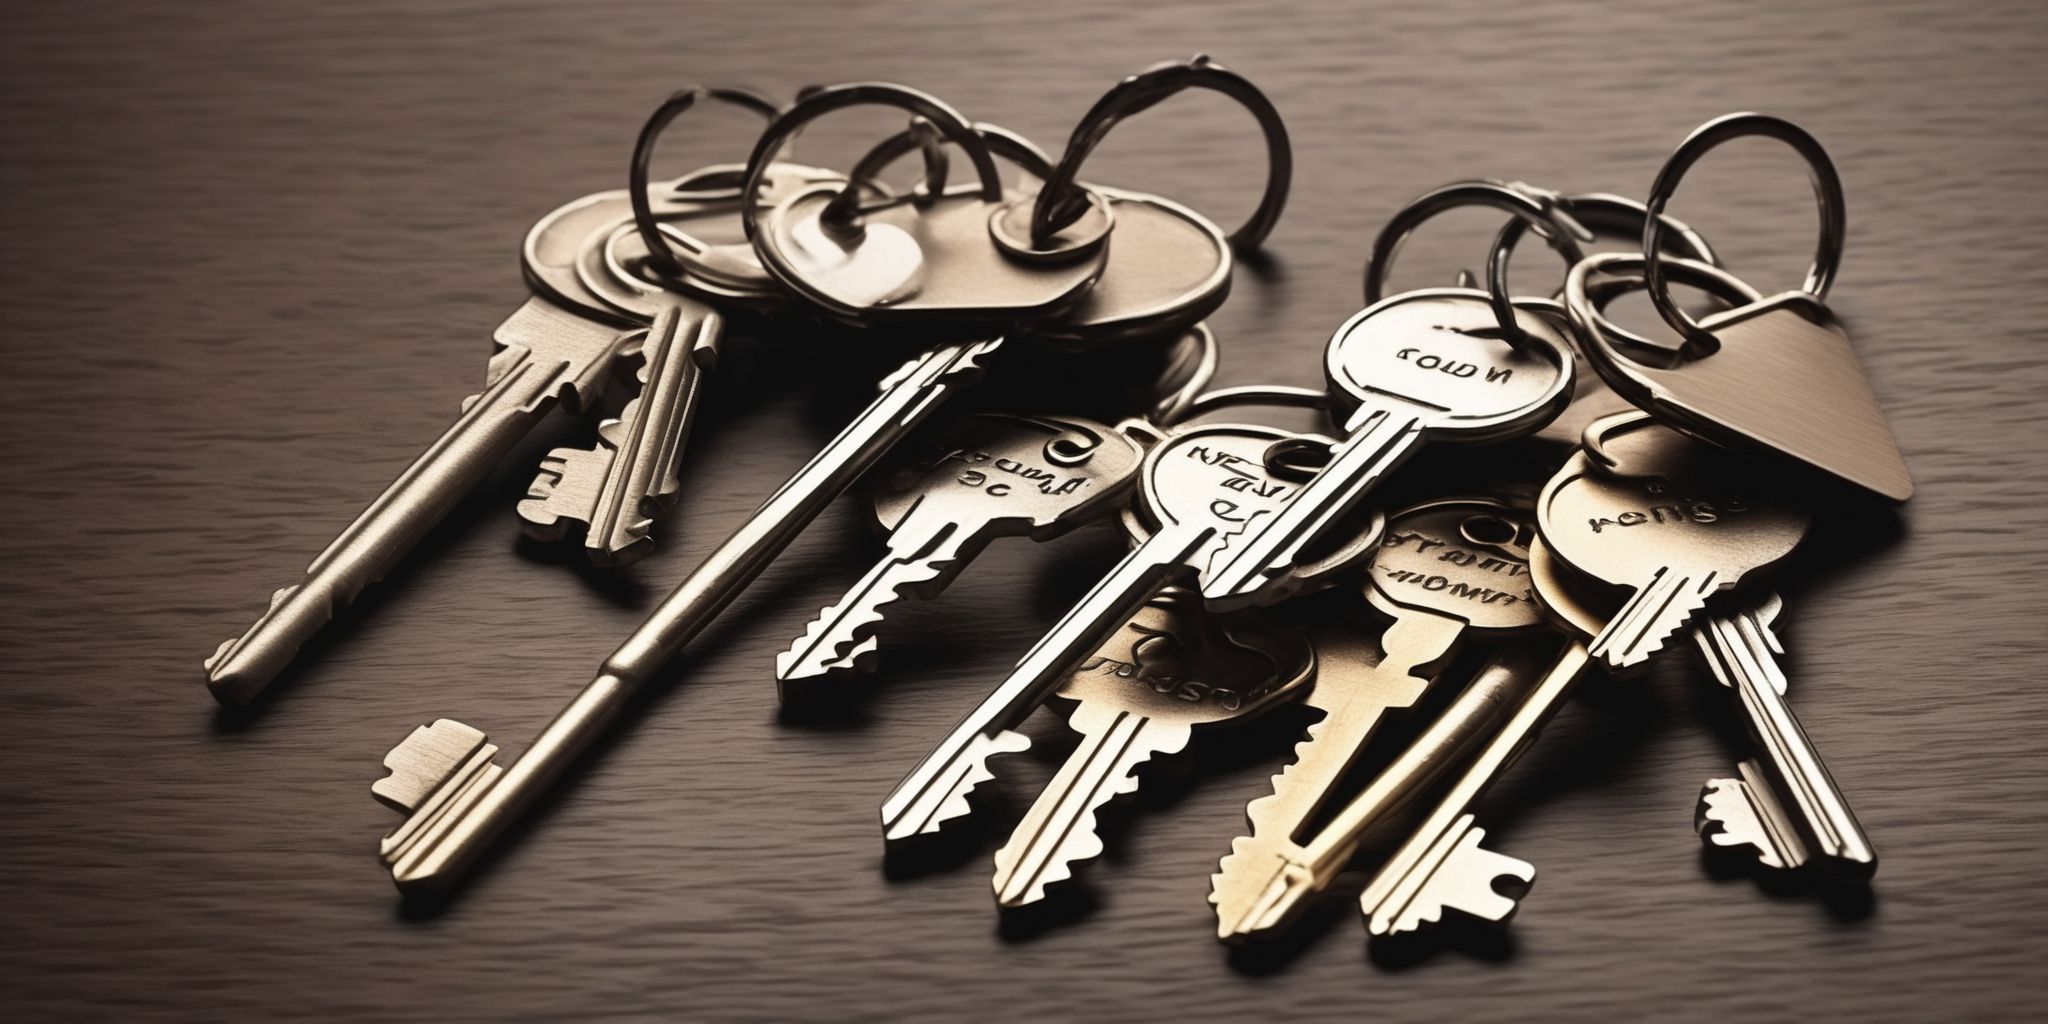 Keys  in realistic, photographic style